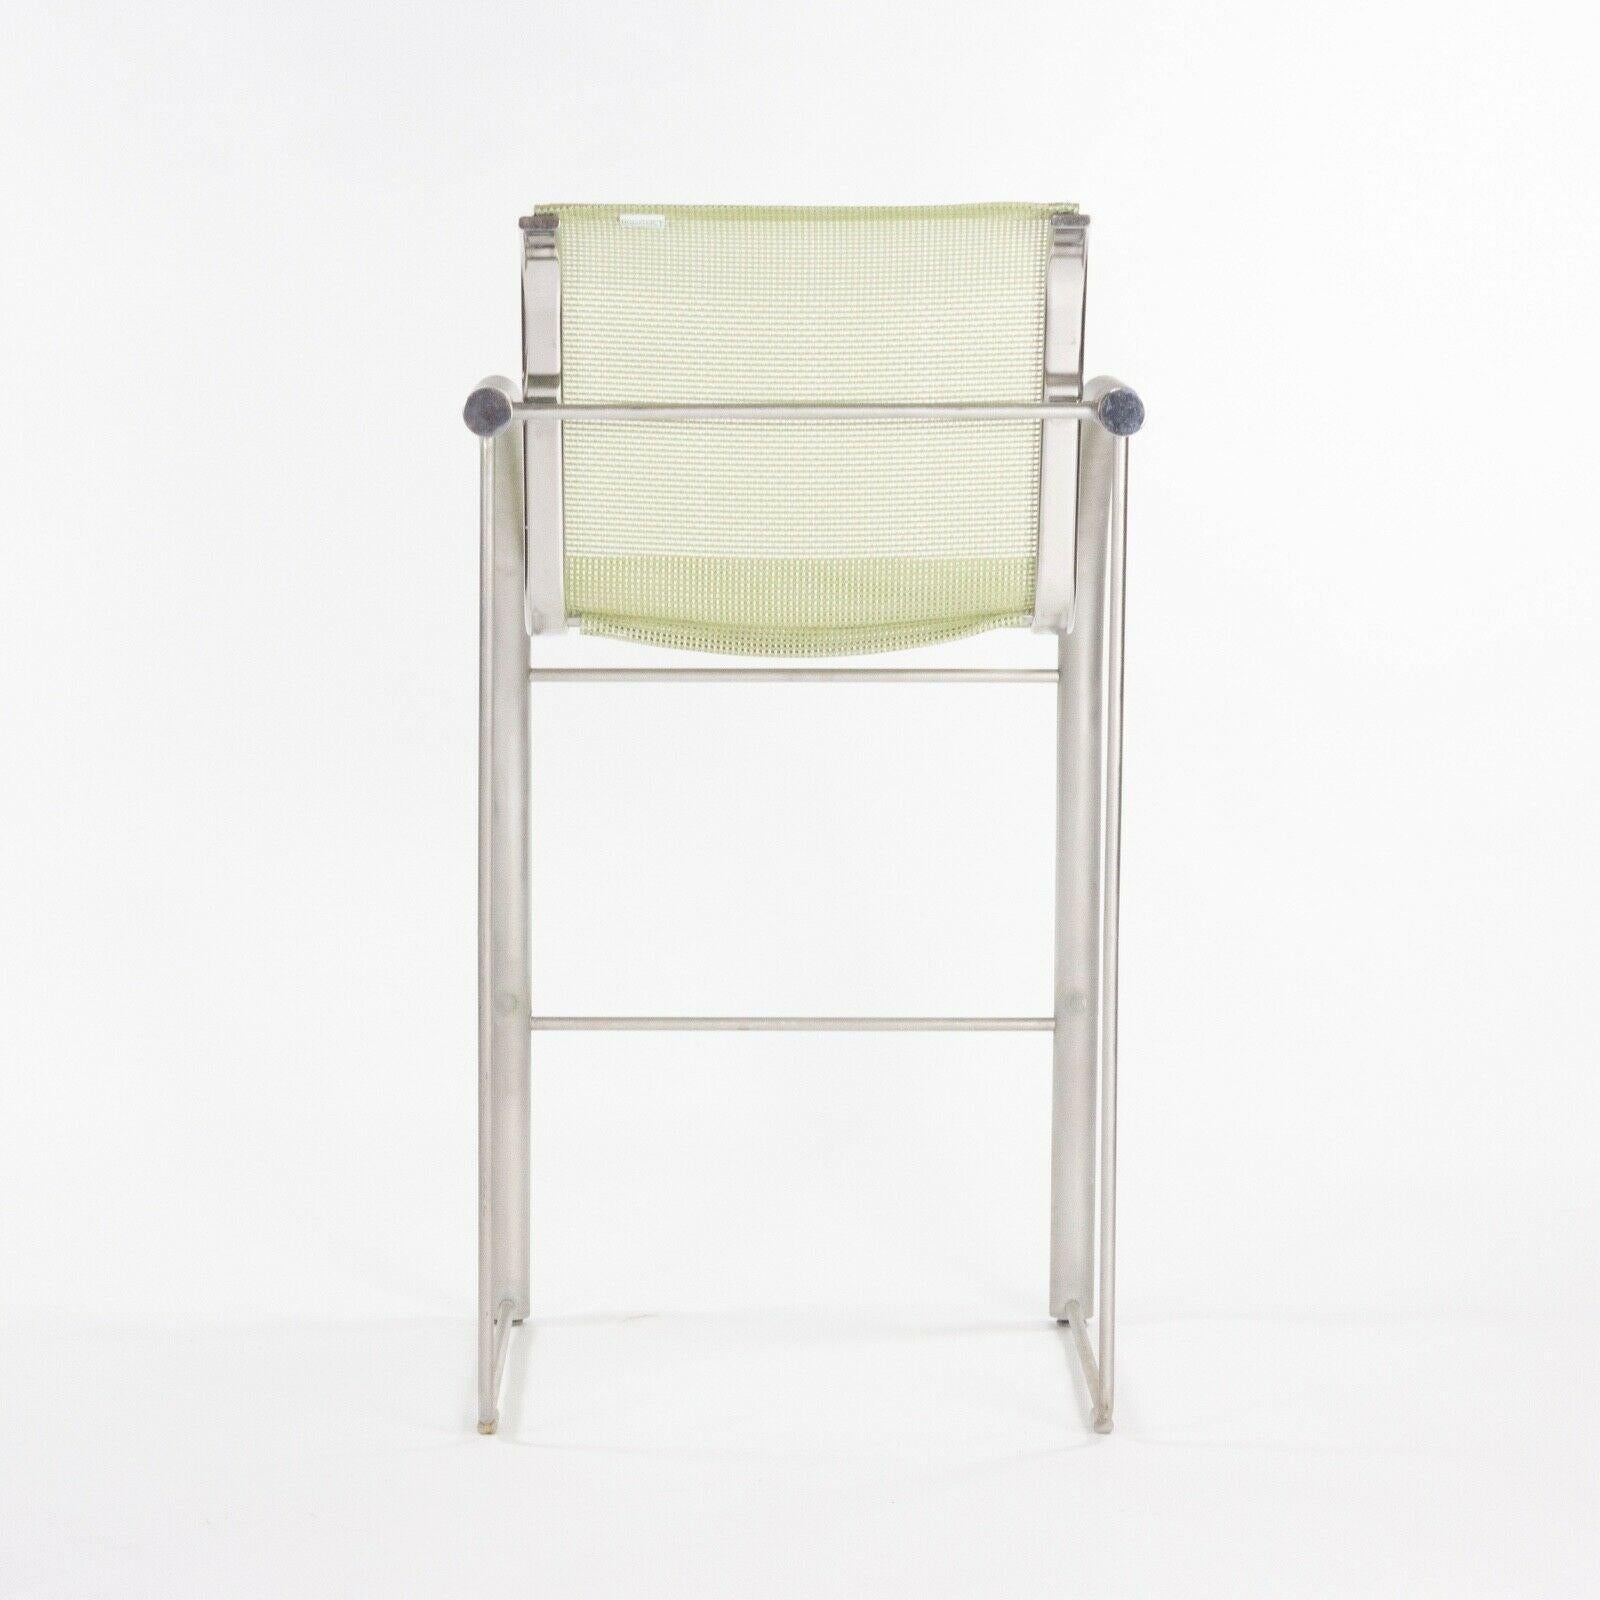 Contemporary Prototype Richard Schultz 2002 Collection Stainless Bar Stool with Outdoor Mesh For Sale